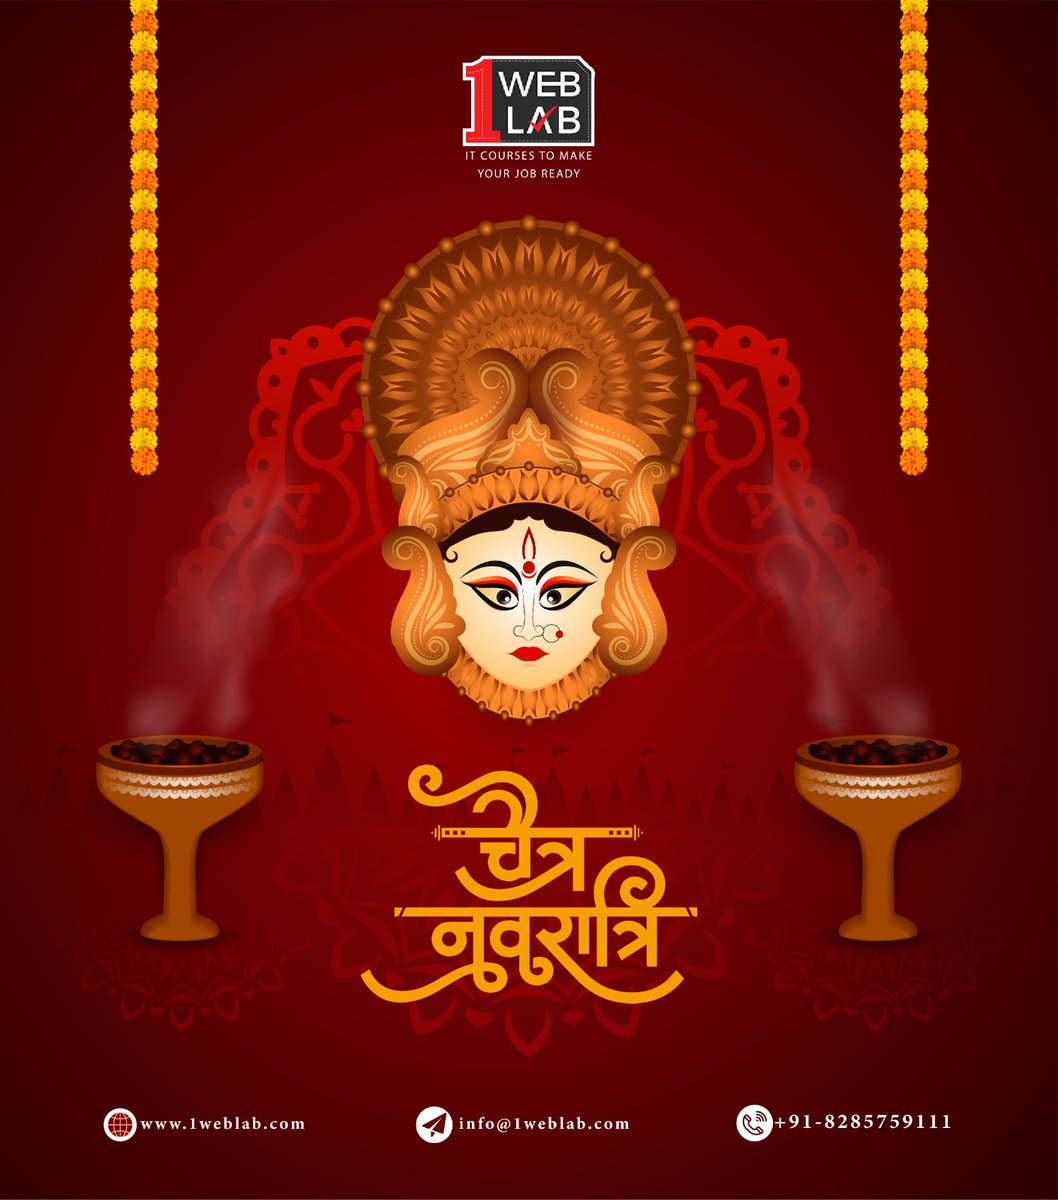 On the occasion of #Chaitra #Navratri, I wish that #Maa #Durga take away all your problems and shower you with her choicest blessings for a wonderful year ahead. #HappyChaitraNavratri ! #1weblab #WebDesigning #WebDeveloping #DigitalMarketing #GraphicDesigning #LanguageClasses